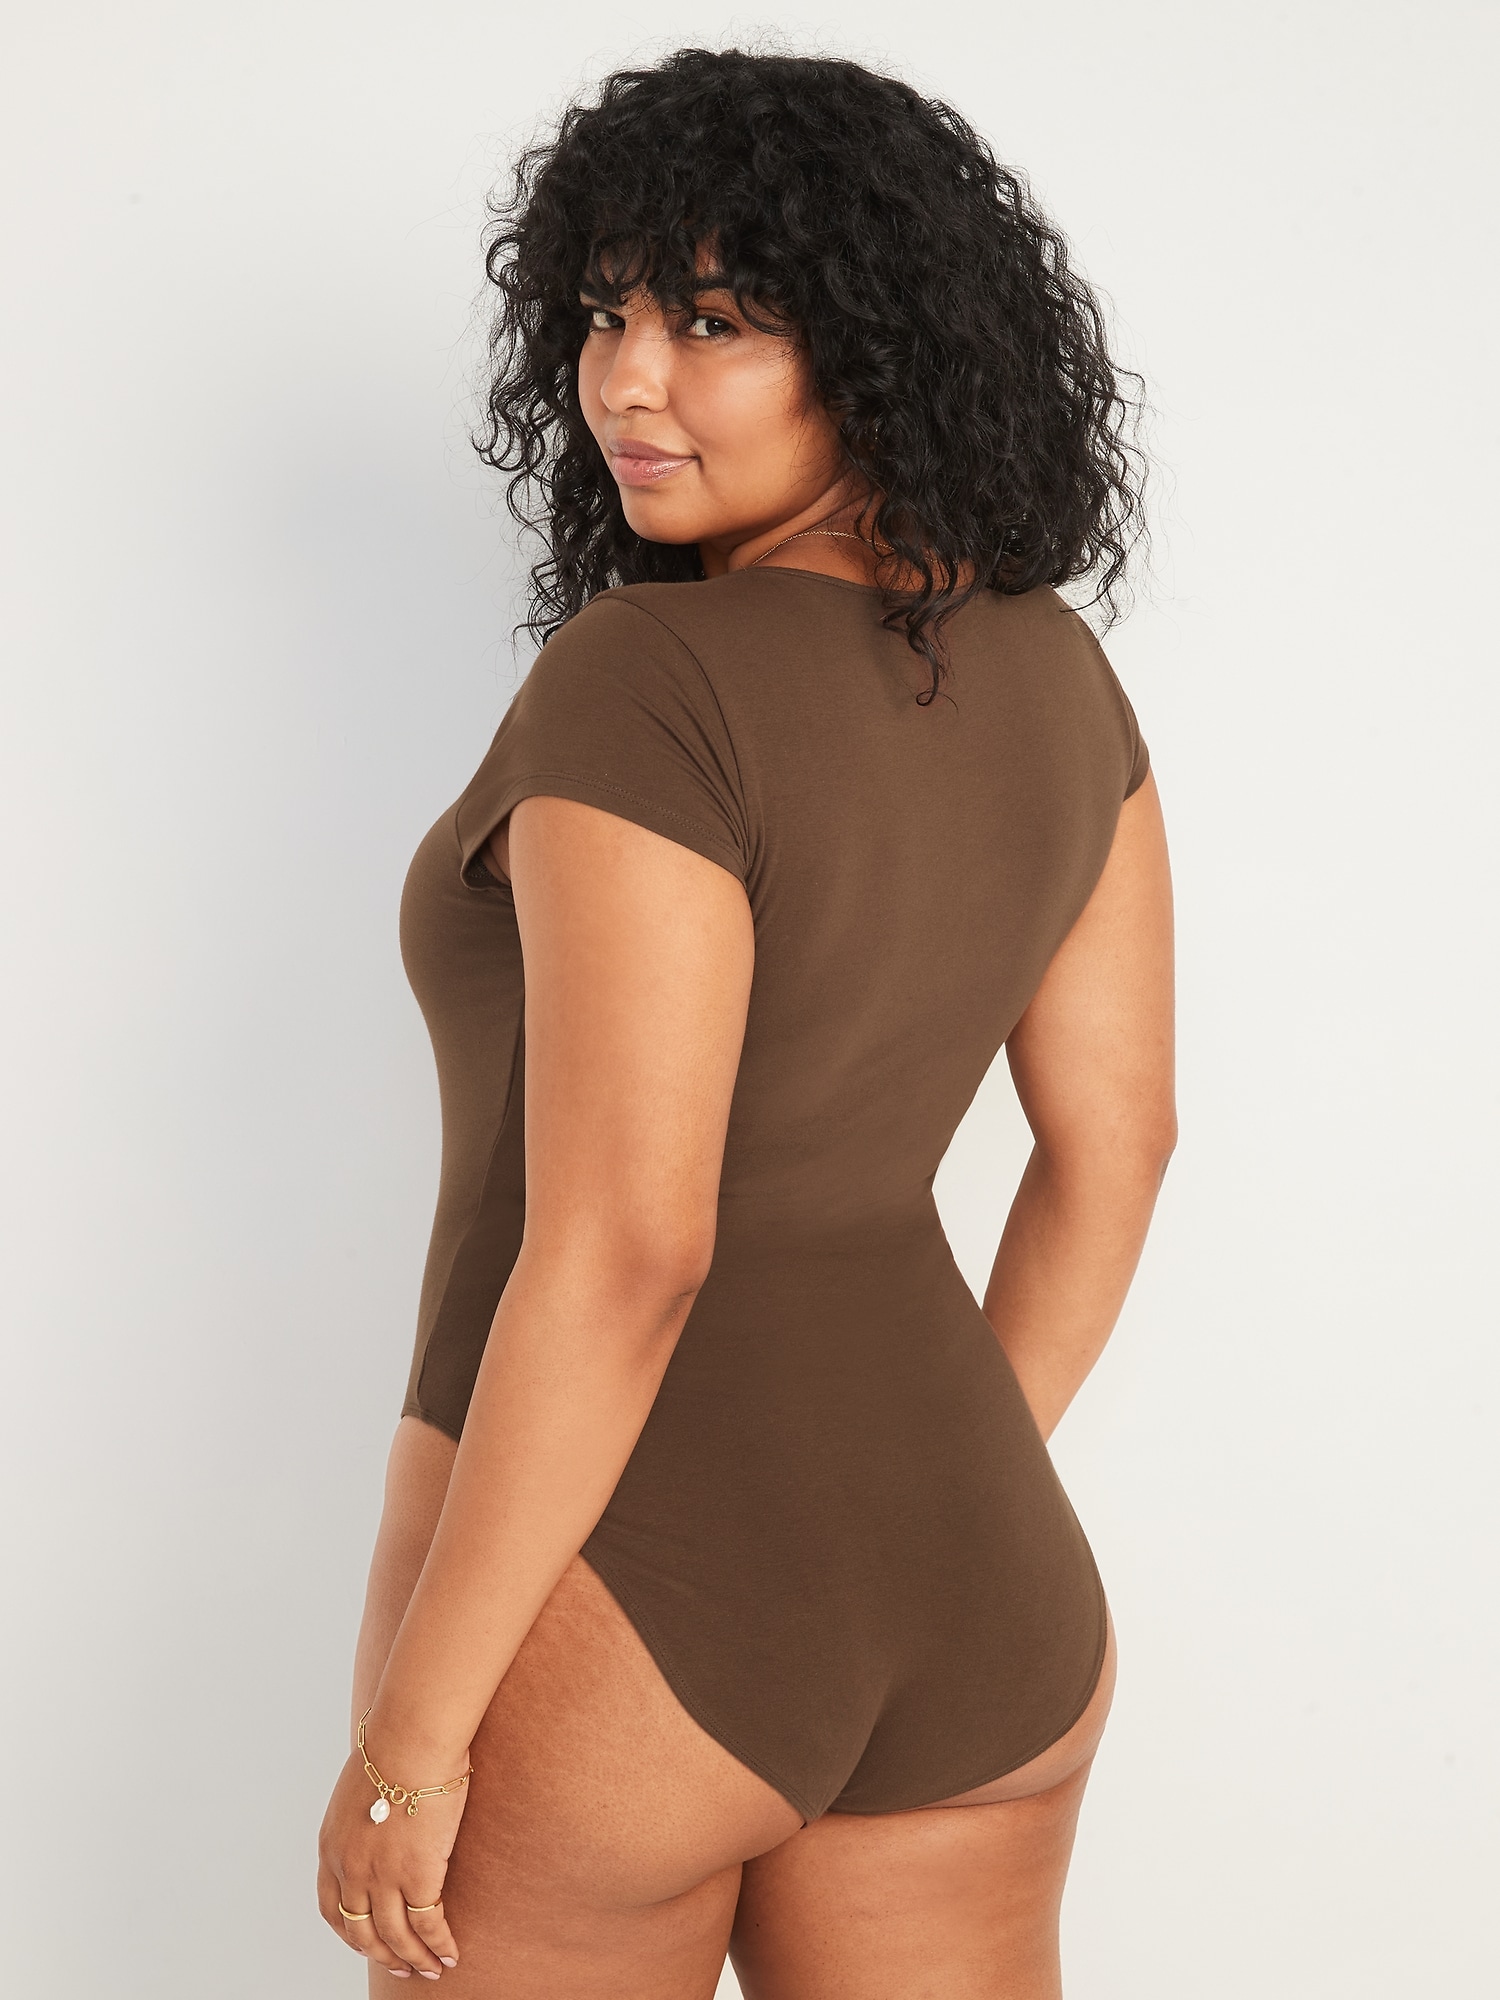 Large Size Womens Tan Bodysuit With Short Sleeves Slim Fit Body